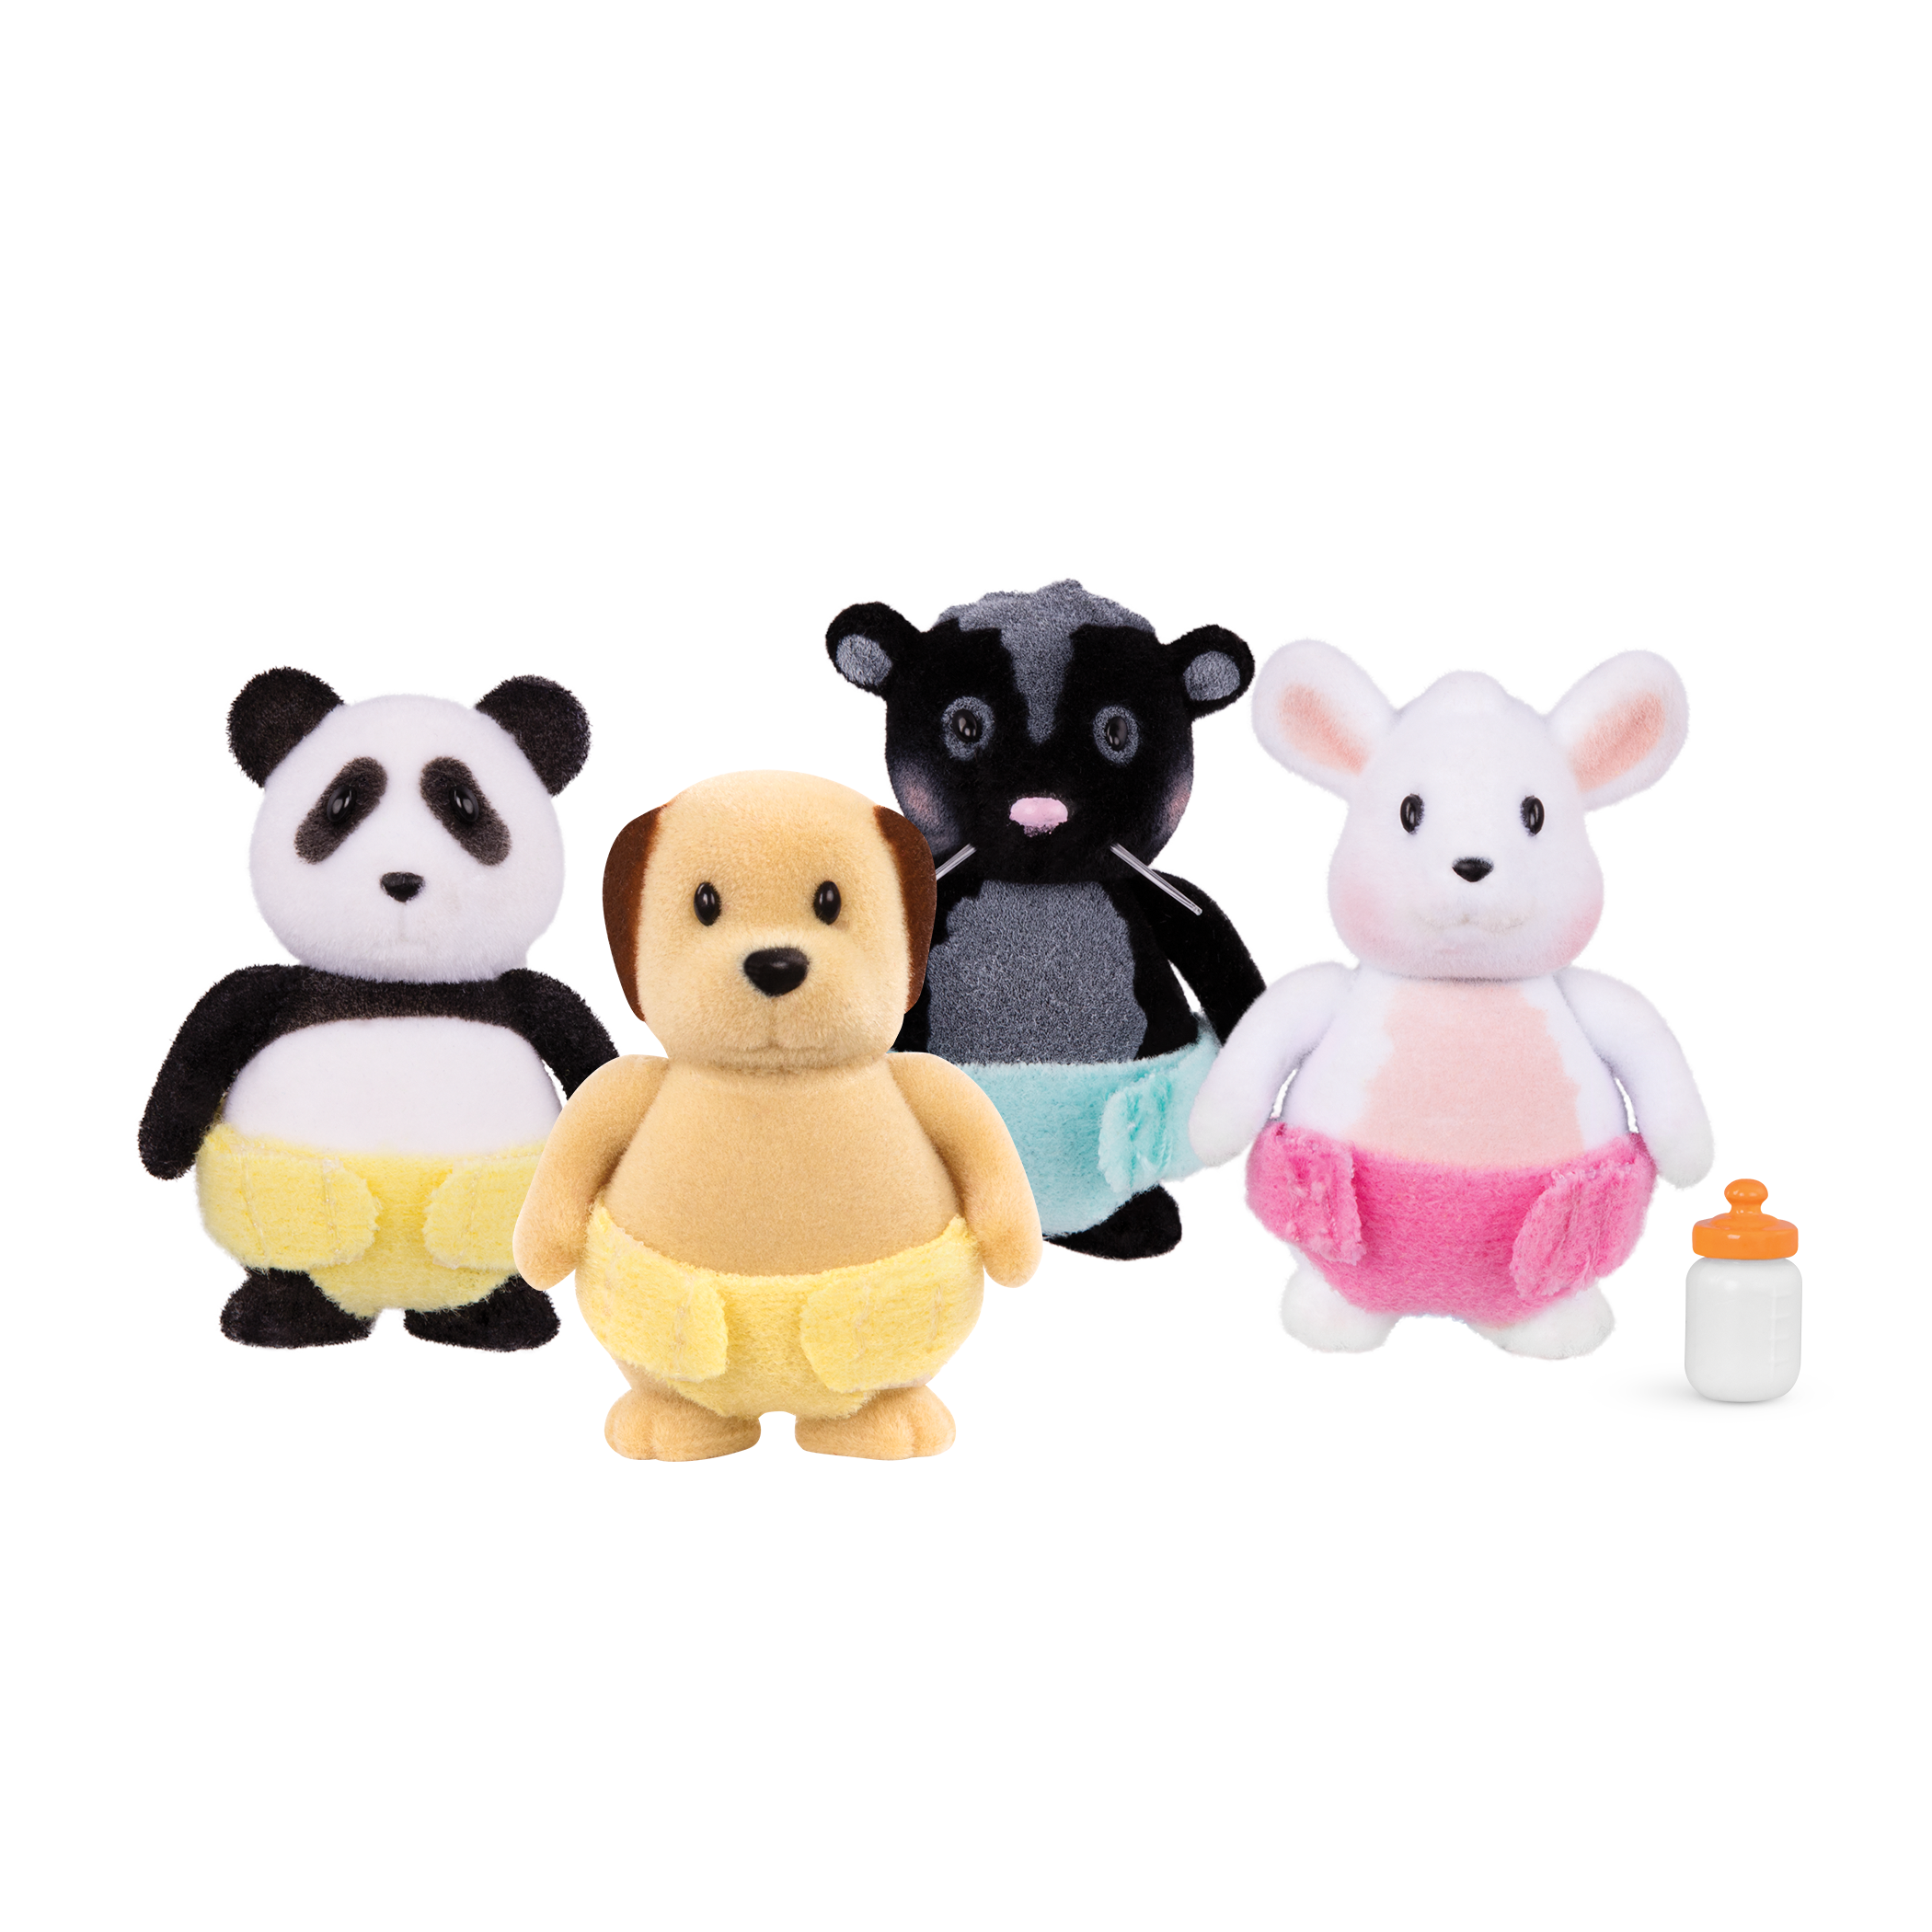 Babeez Surprise, Toy Baby Character with Accessories